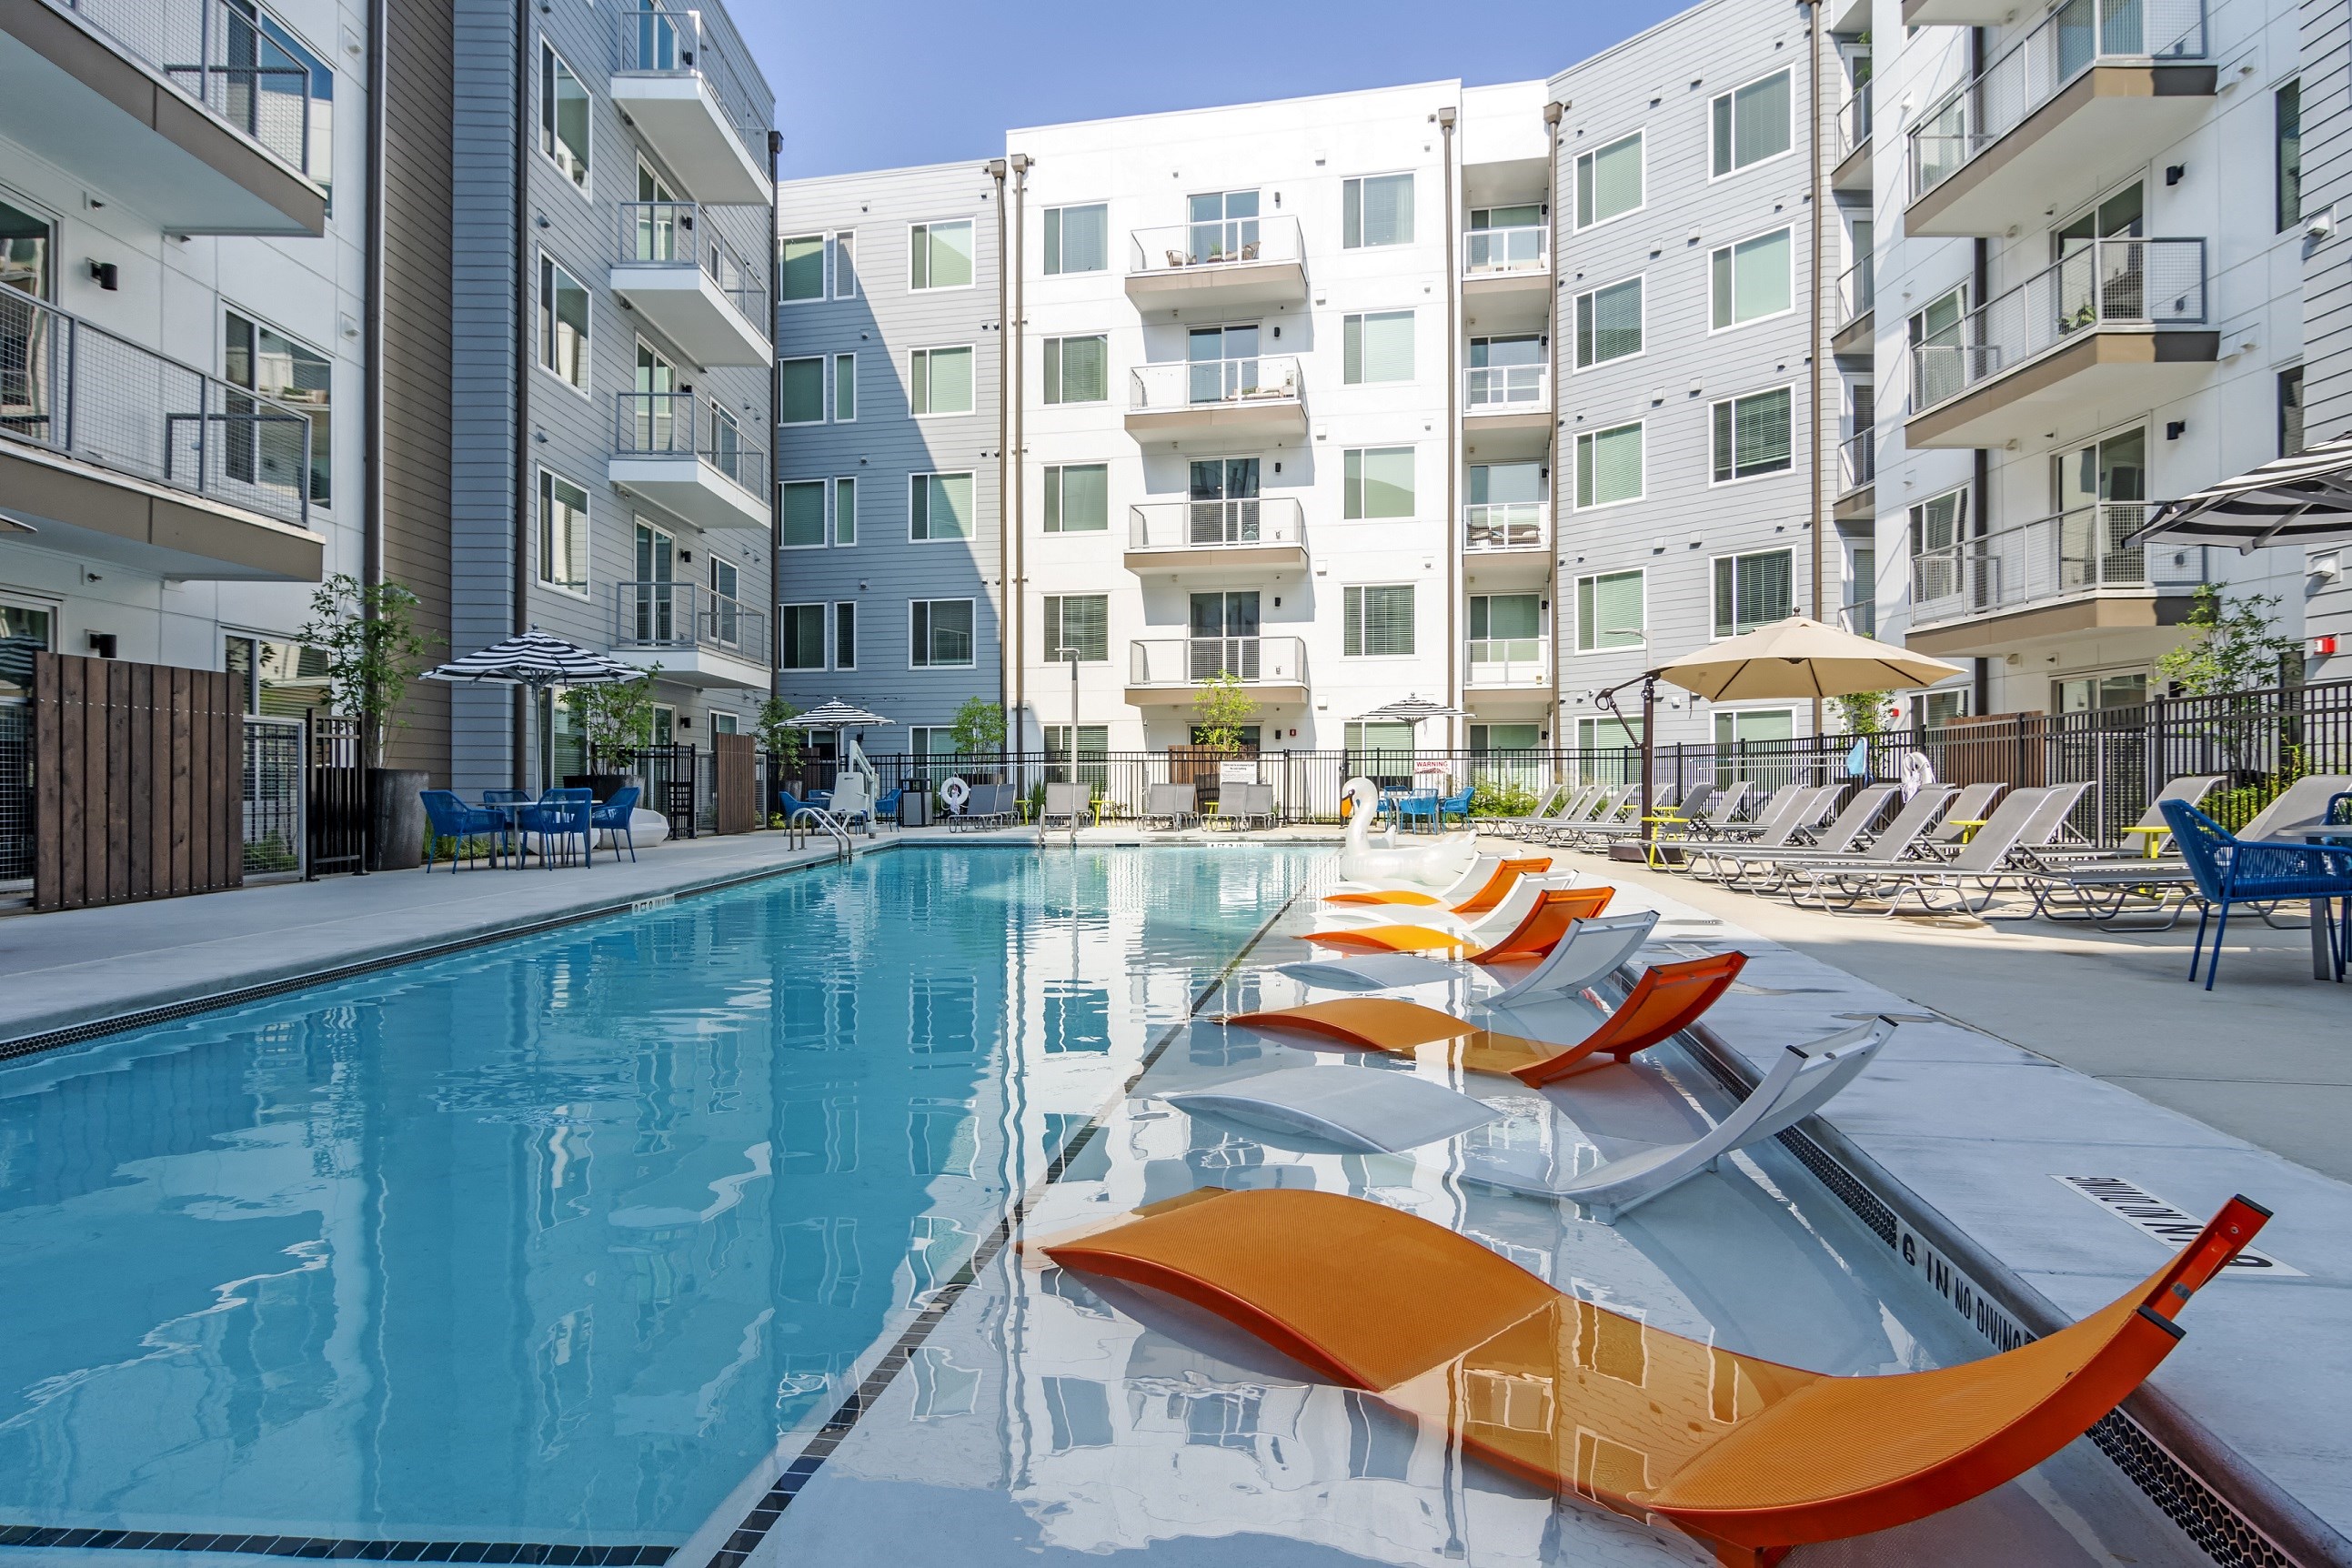 Swimming Pool With Relaxing Sundecks at Spoke Apartments, Georgia, 30307